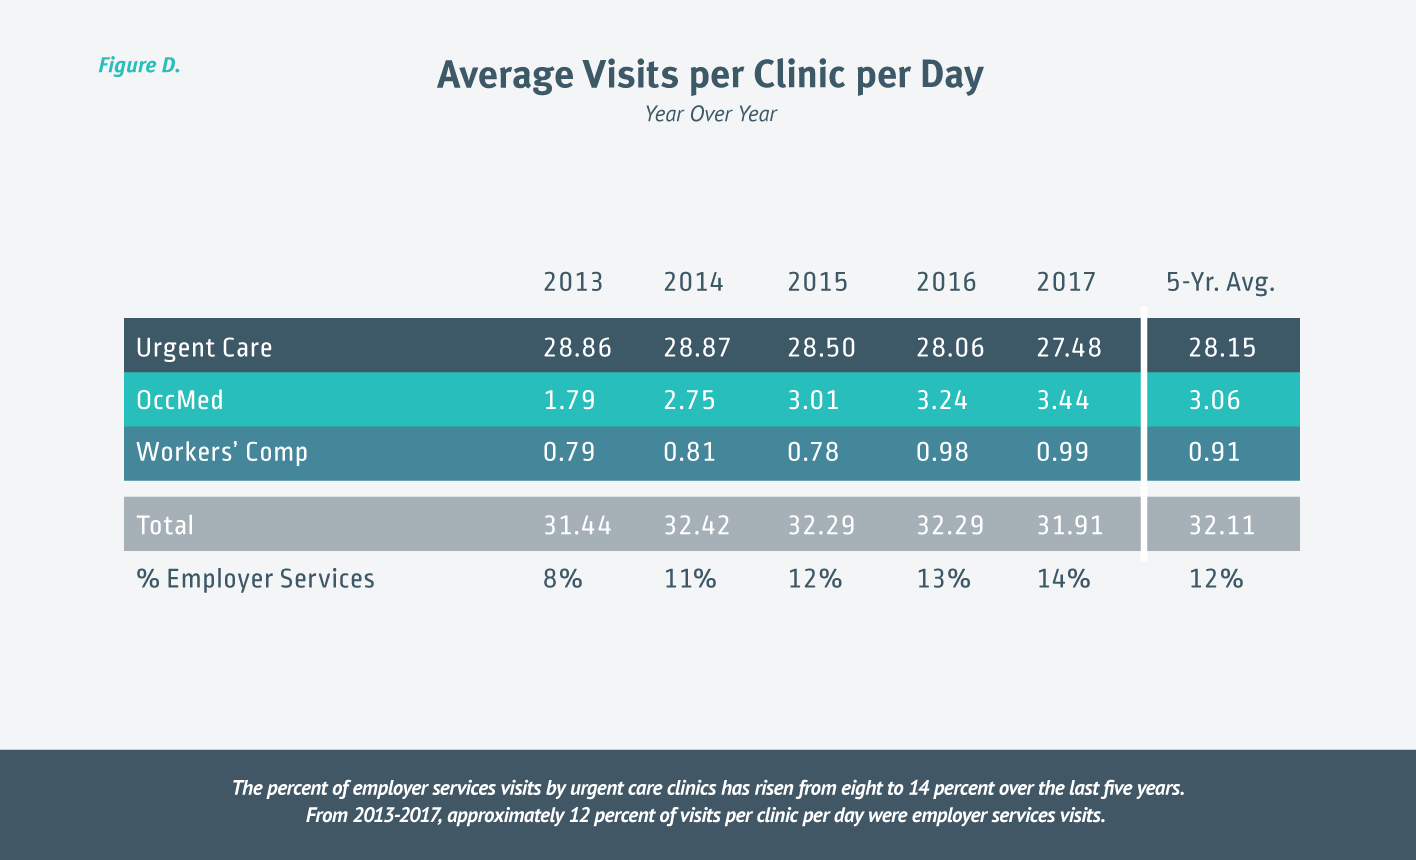 Chart showing Average Urgent Care Visits Per Clinic Per Day Year Over Year